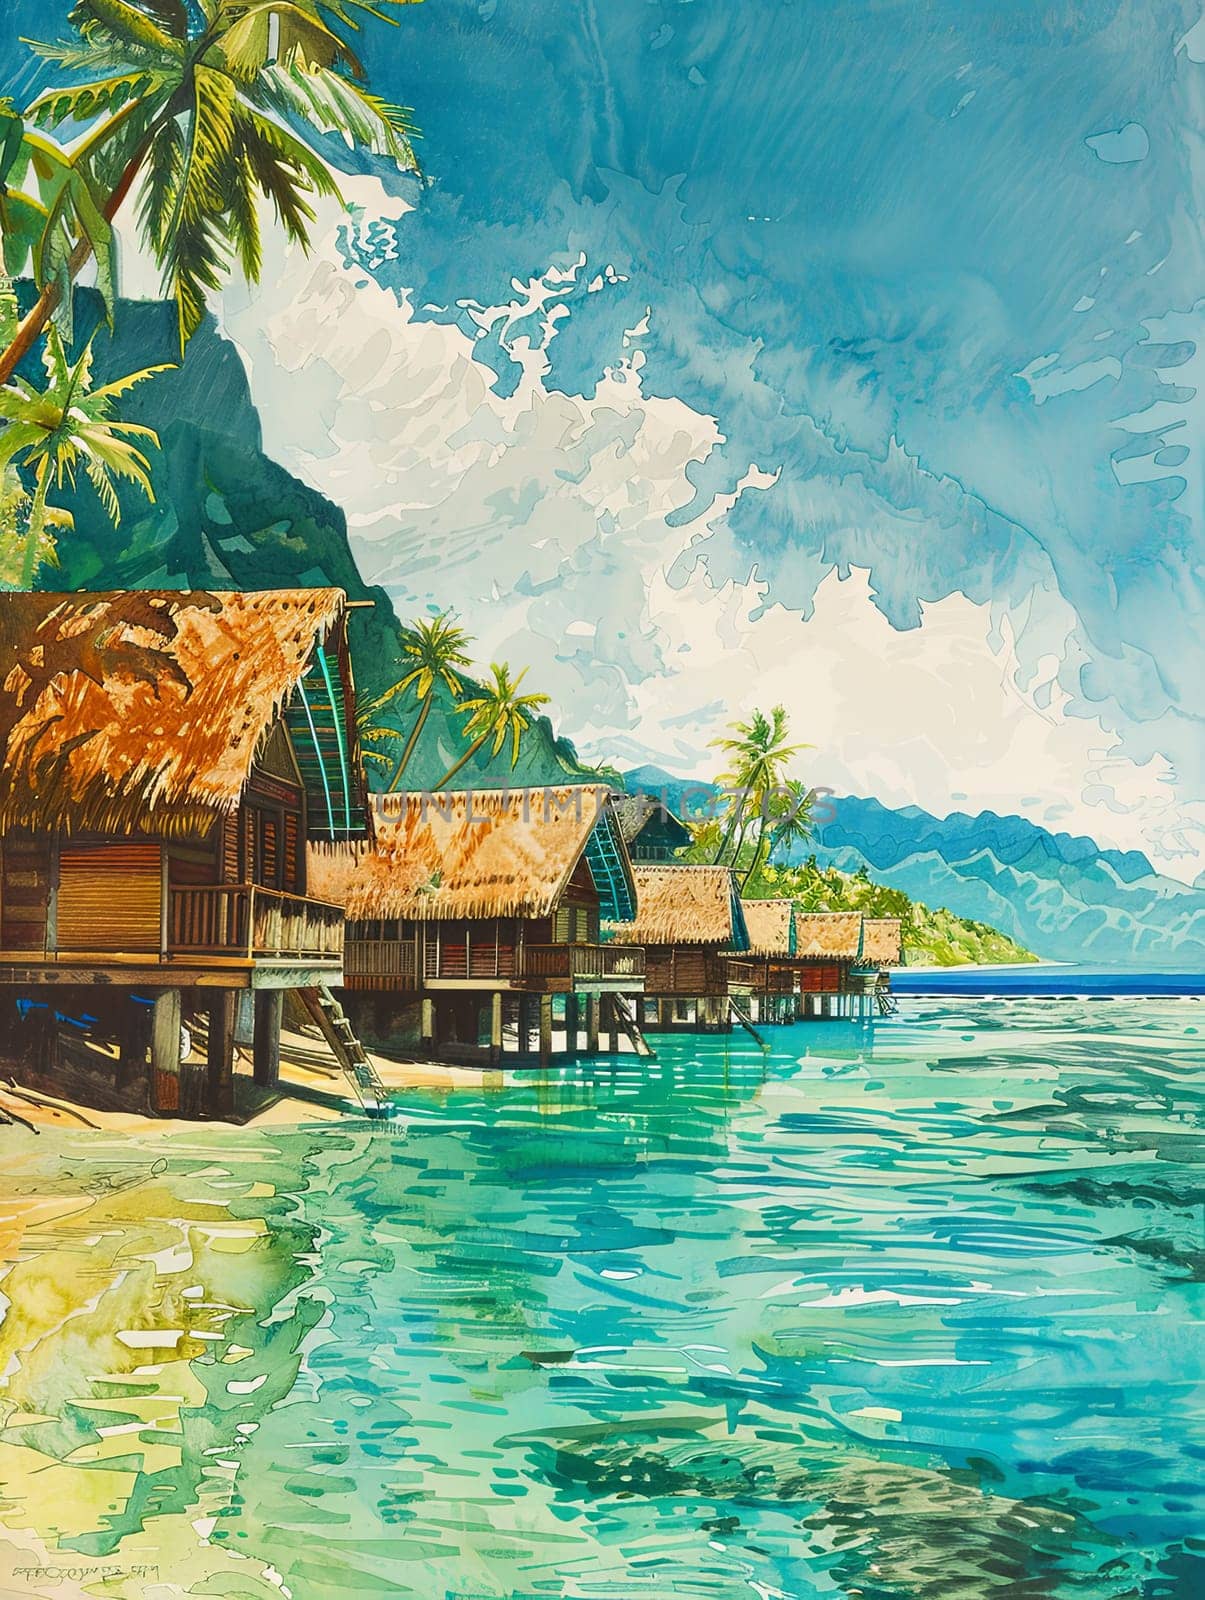 A painting of a tropical beach featuring a hut, palm trees, and crystal-clear waters.